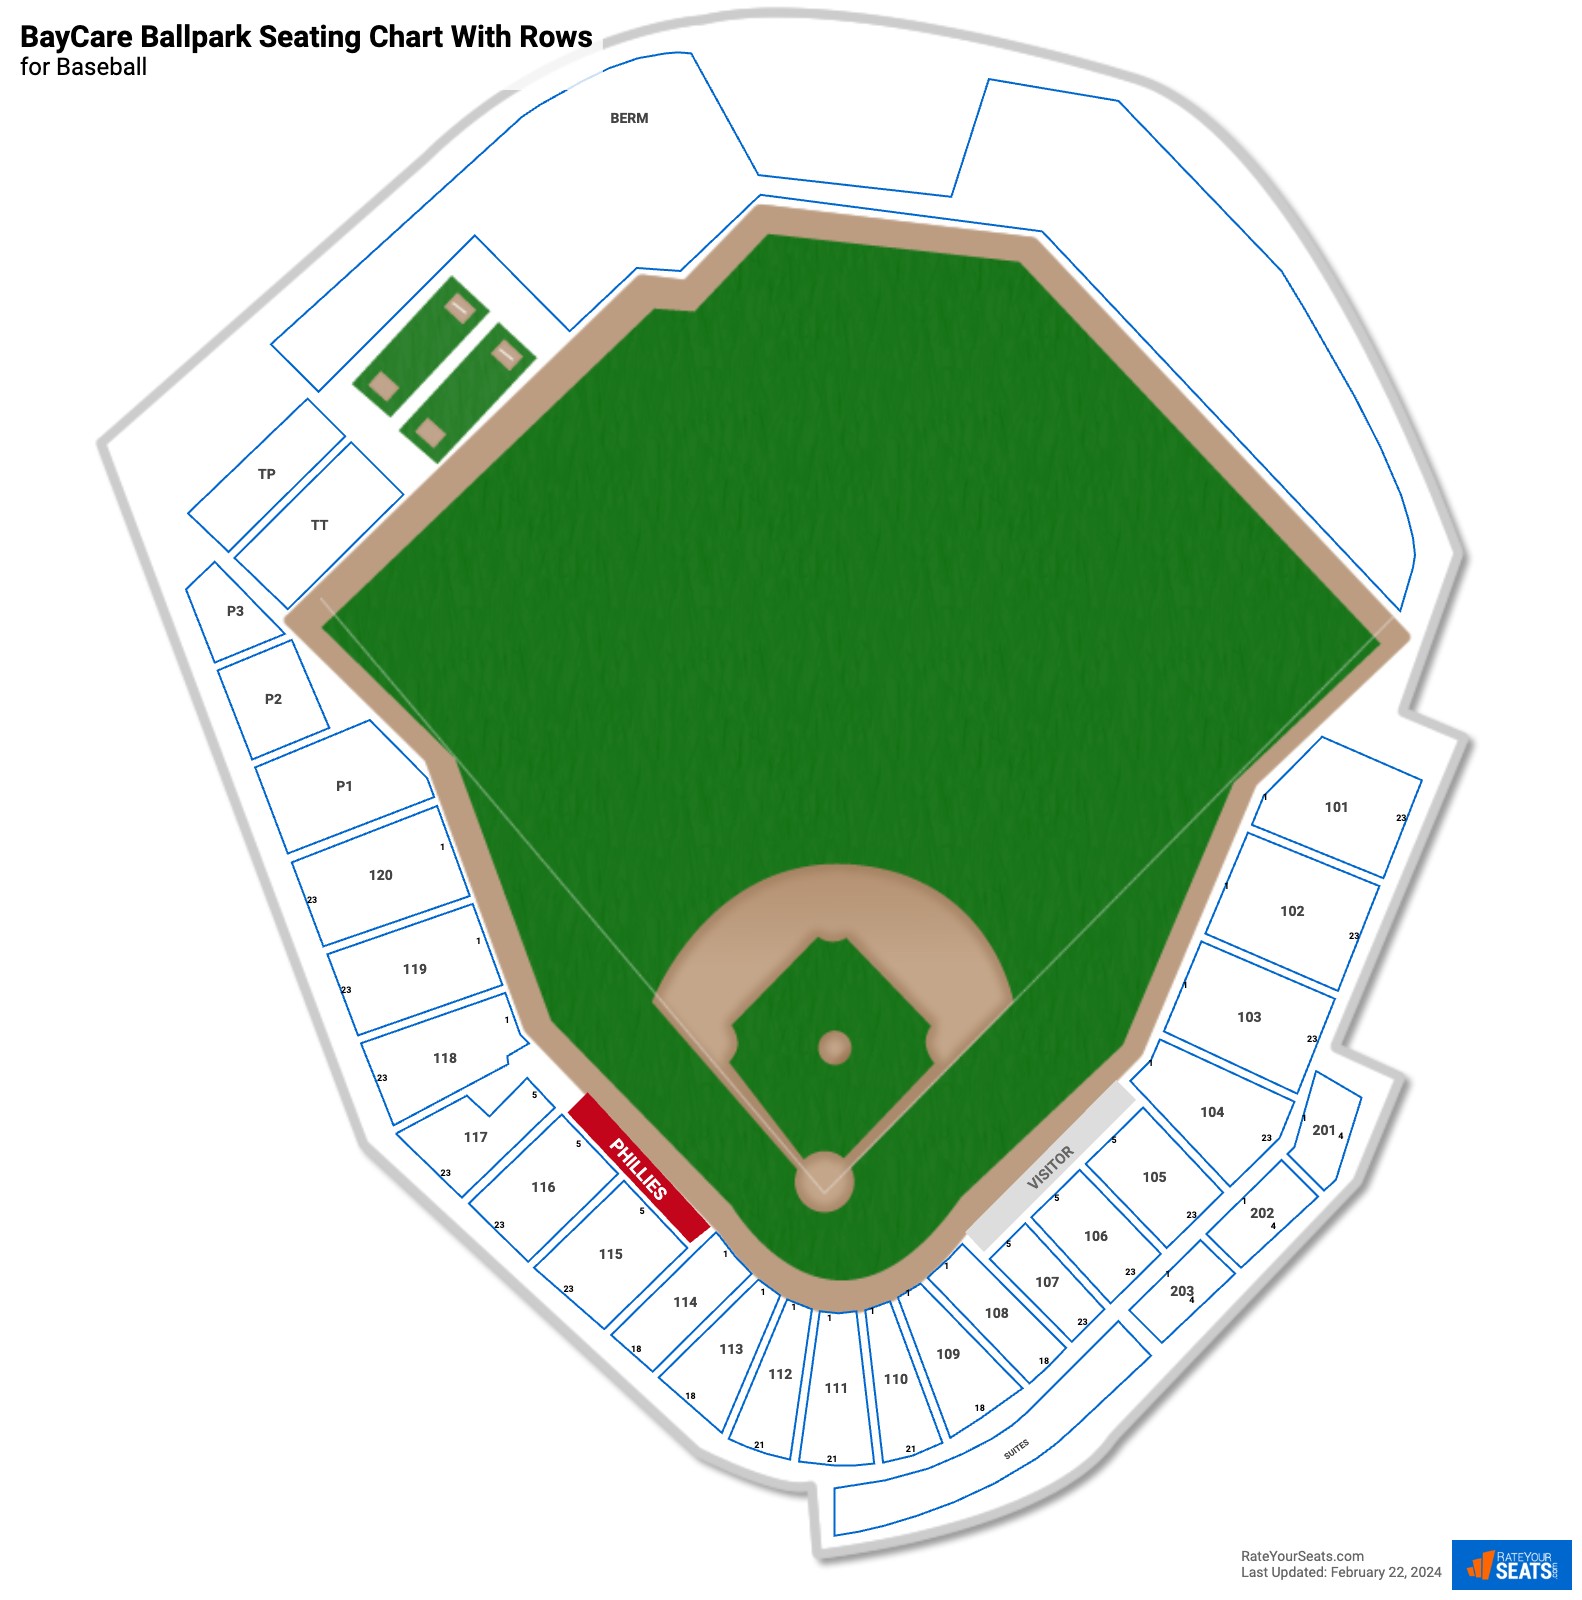 BayCare Ballpark seating chart with row numbers